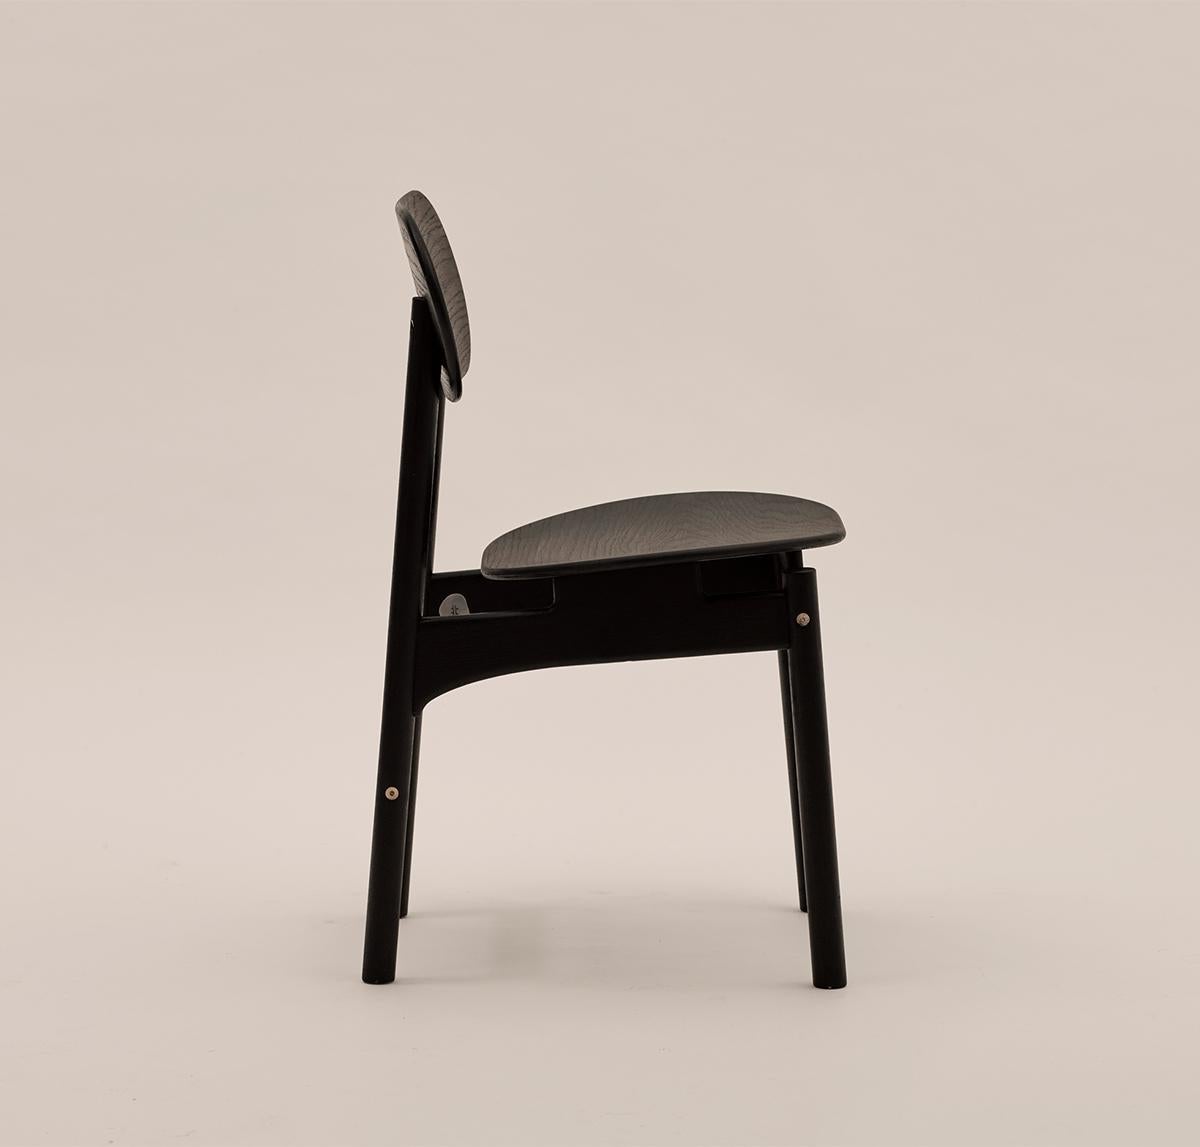 Characterized by elliptical forms, Frame Chair is an expression of comfort and well-balanced geometry. The confident relationship between skeleton, seat and backrest figures its presence gently.

It is a seating piece that presents the beauty of